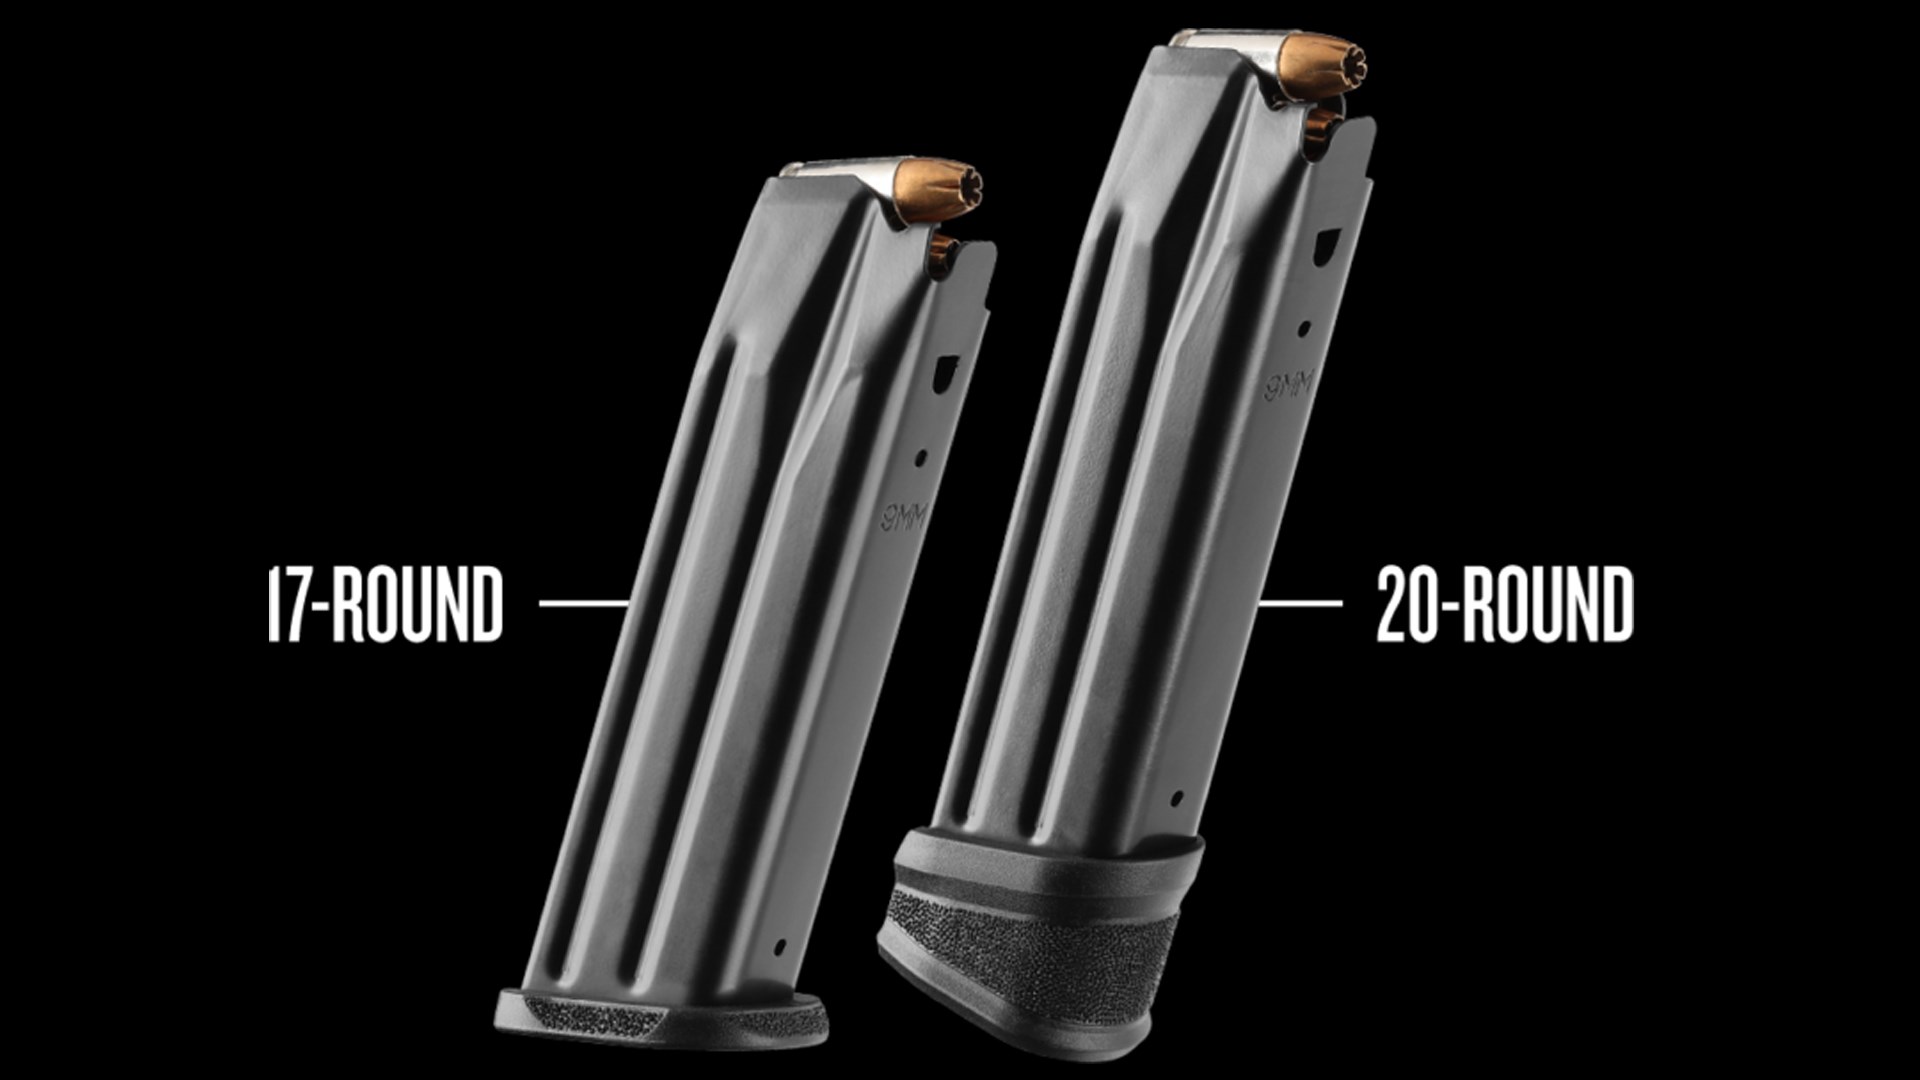 Details of the 17-round and 20-round magazines available for the Springfield Armory Echelon.